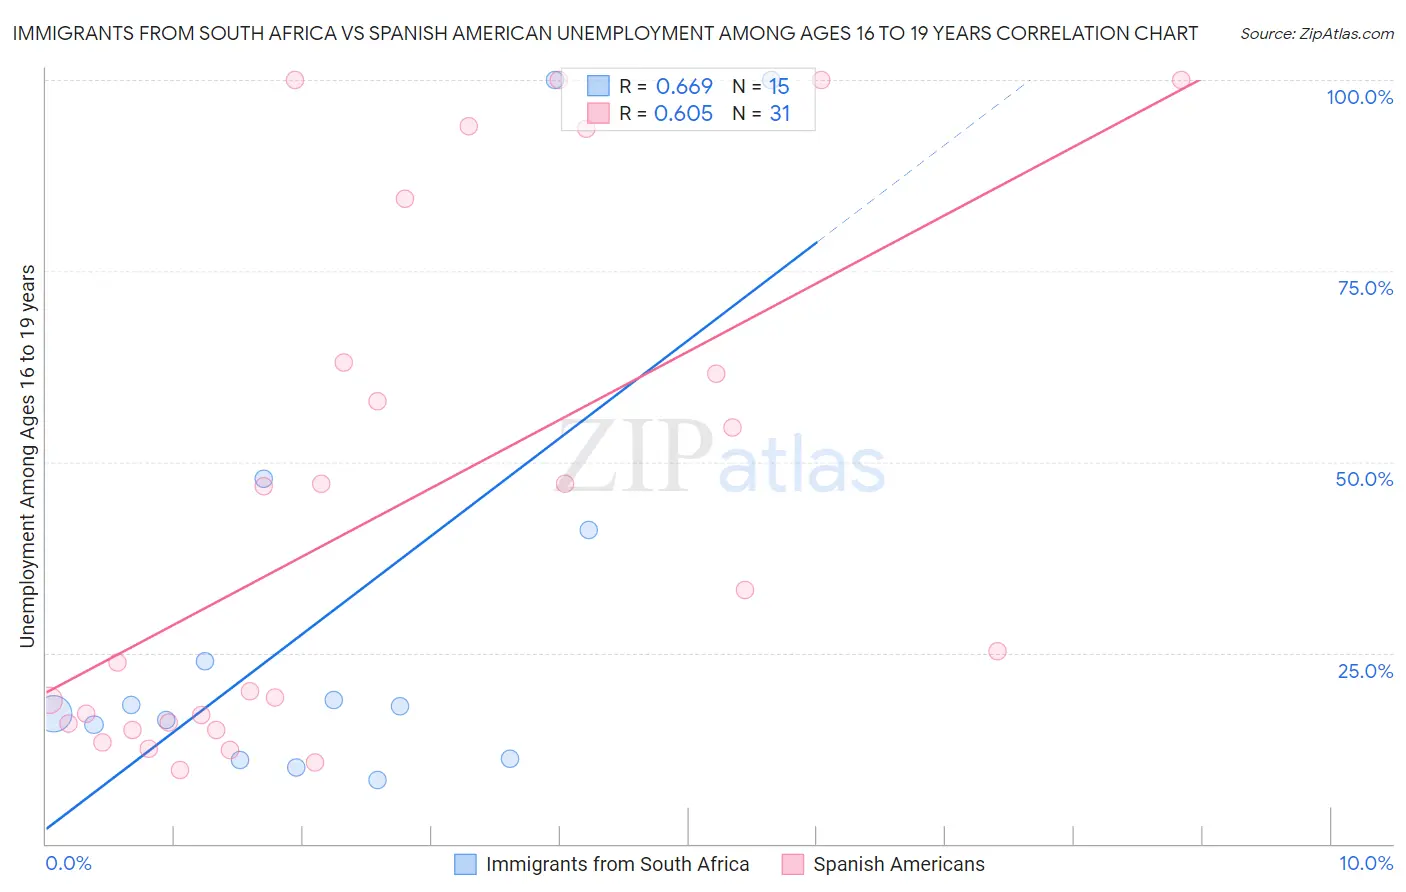 Immigrants from South Africa vs Spanish American Unemployment Among Ages 16 to 19 years